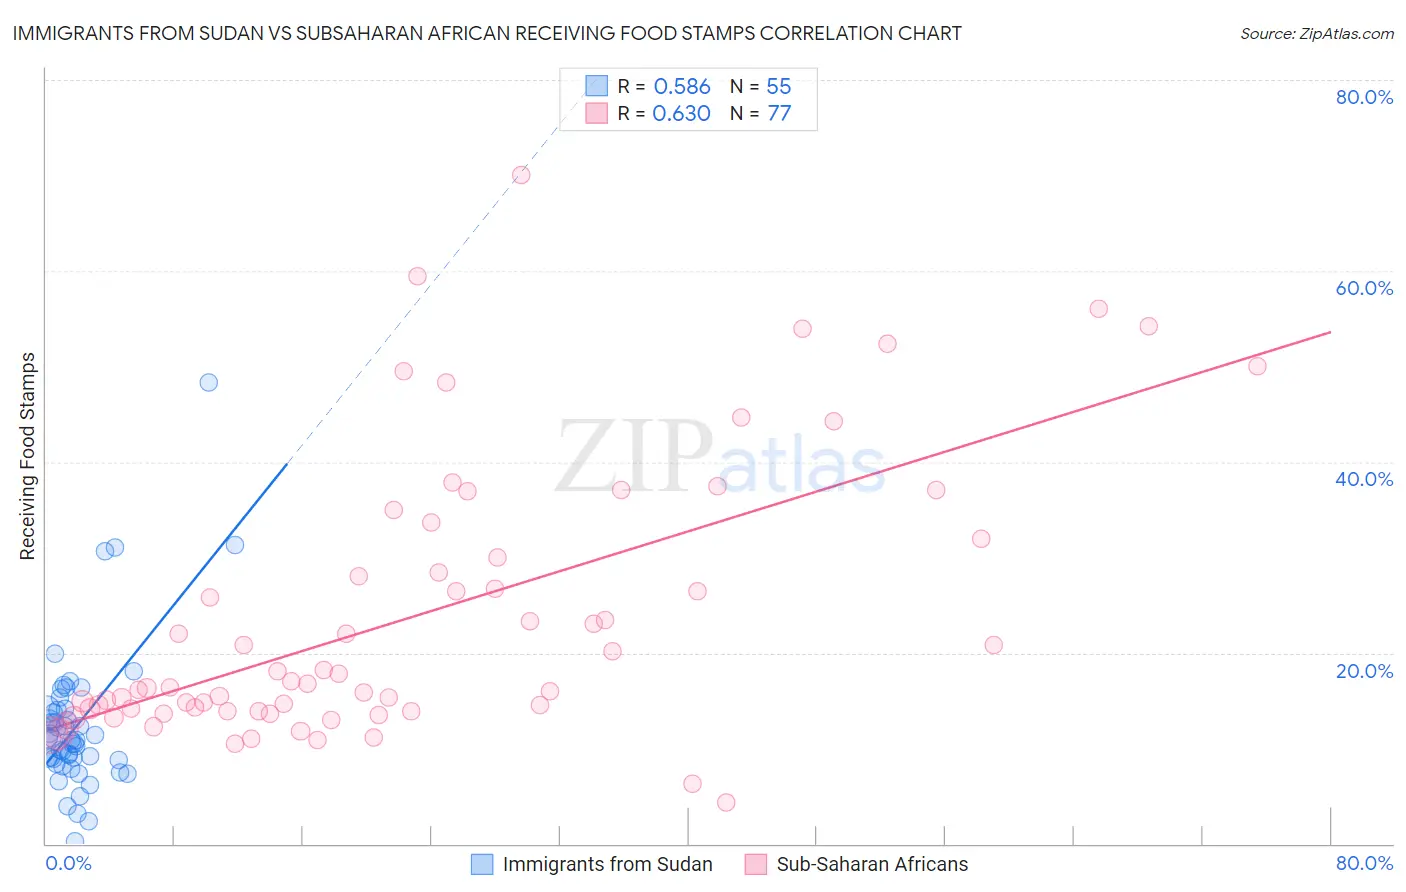 Immigrants from Sudan vs Subsaharan African Receiving Food Stamps